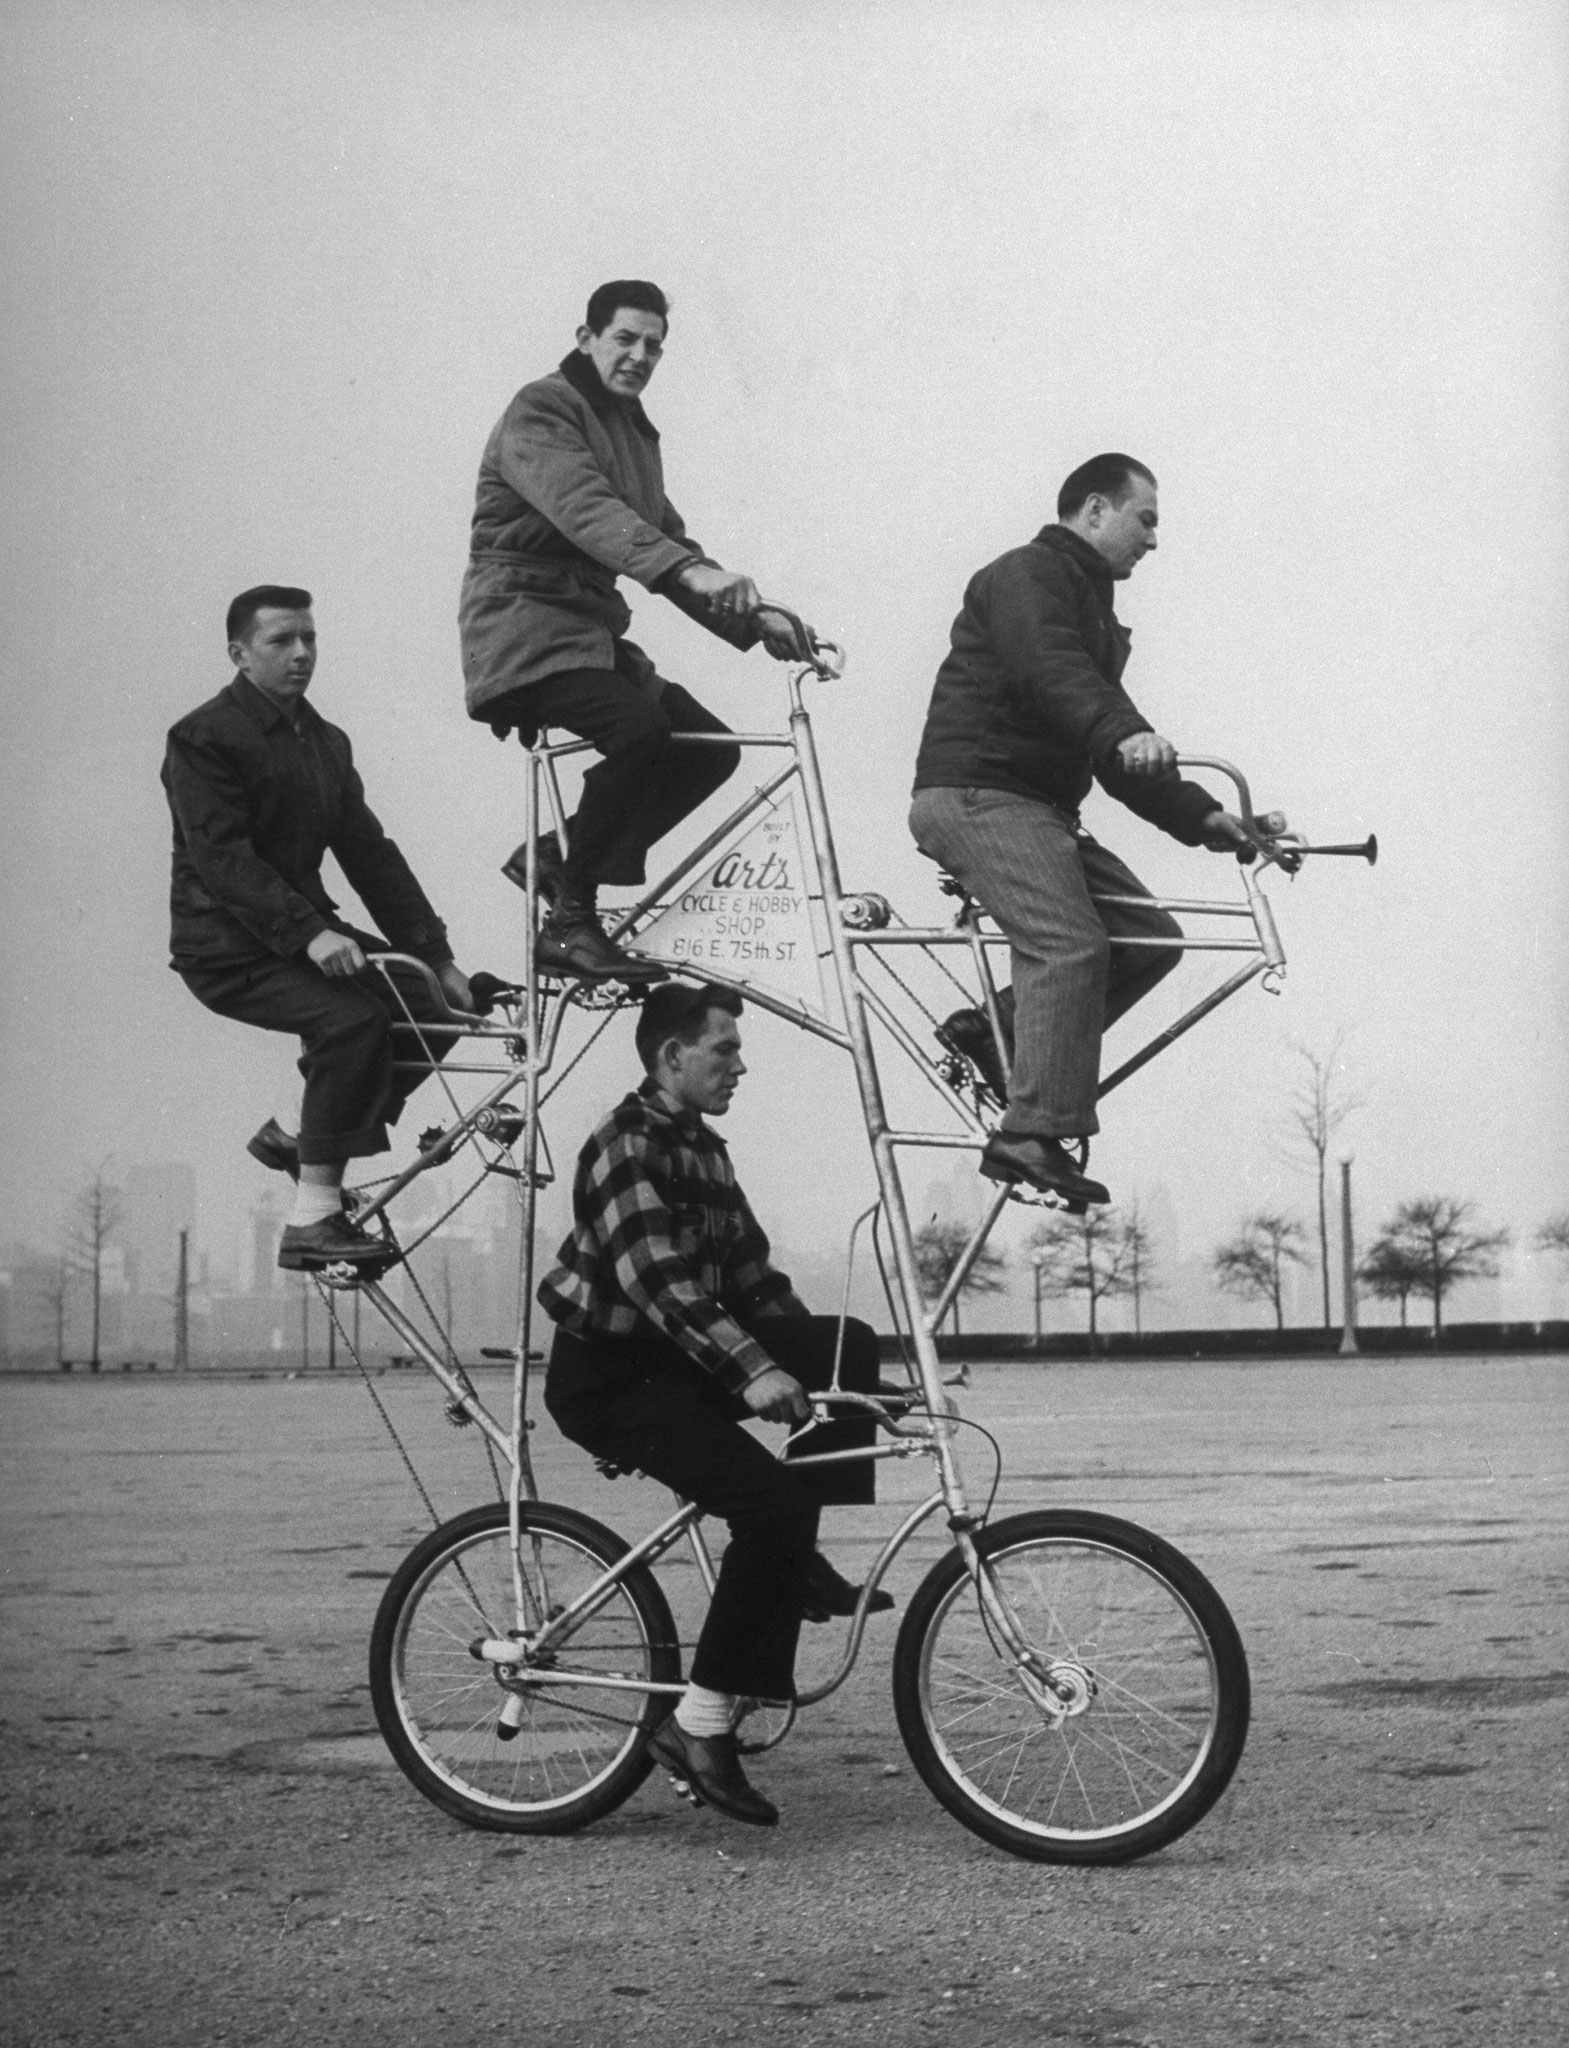 Eccentric four-man bicycle built by Art Rothchild (top position).